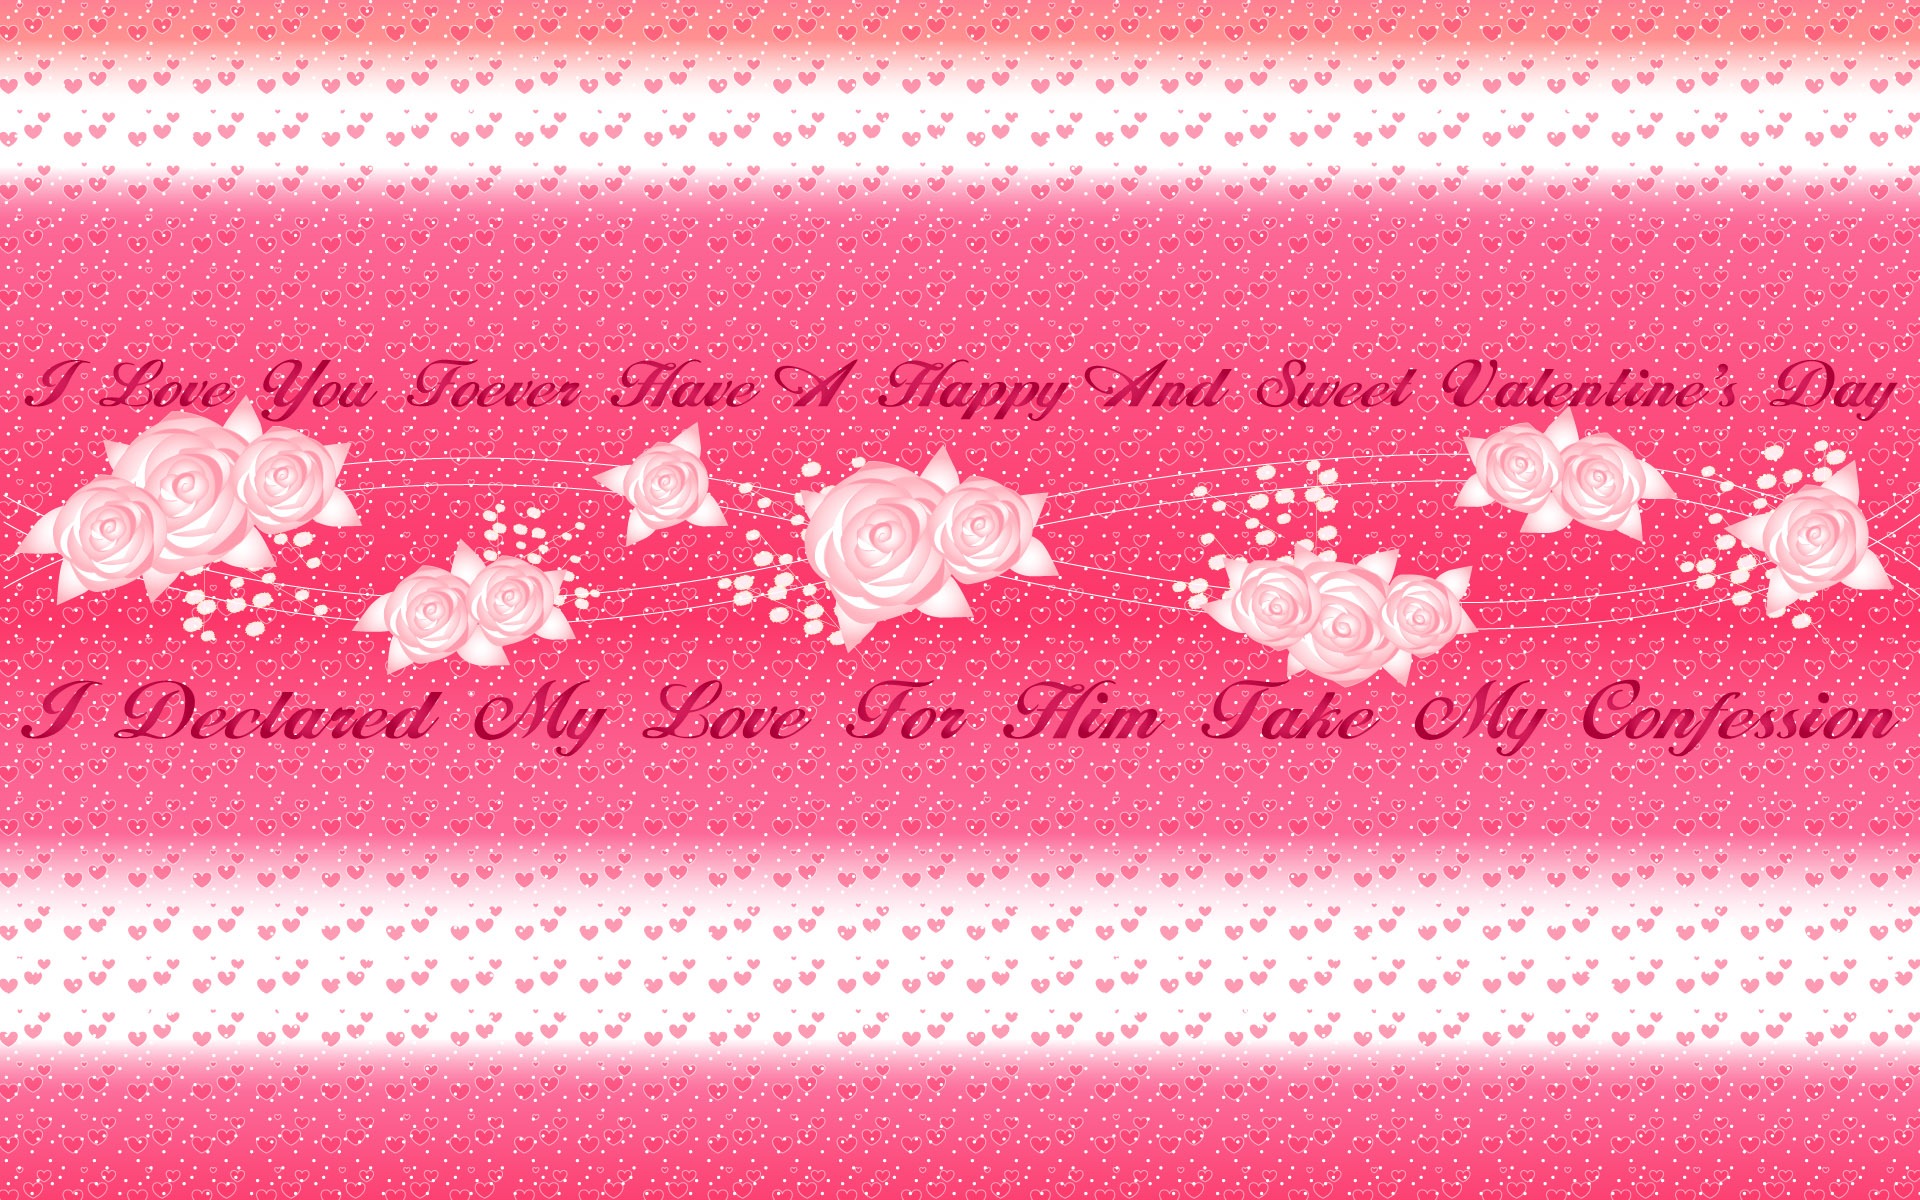 Valentine's Day Theme Wallpapers (2) #7 - 1920x1200